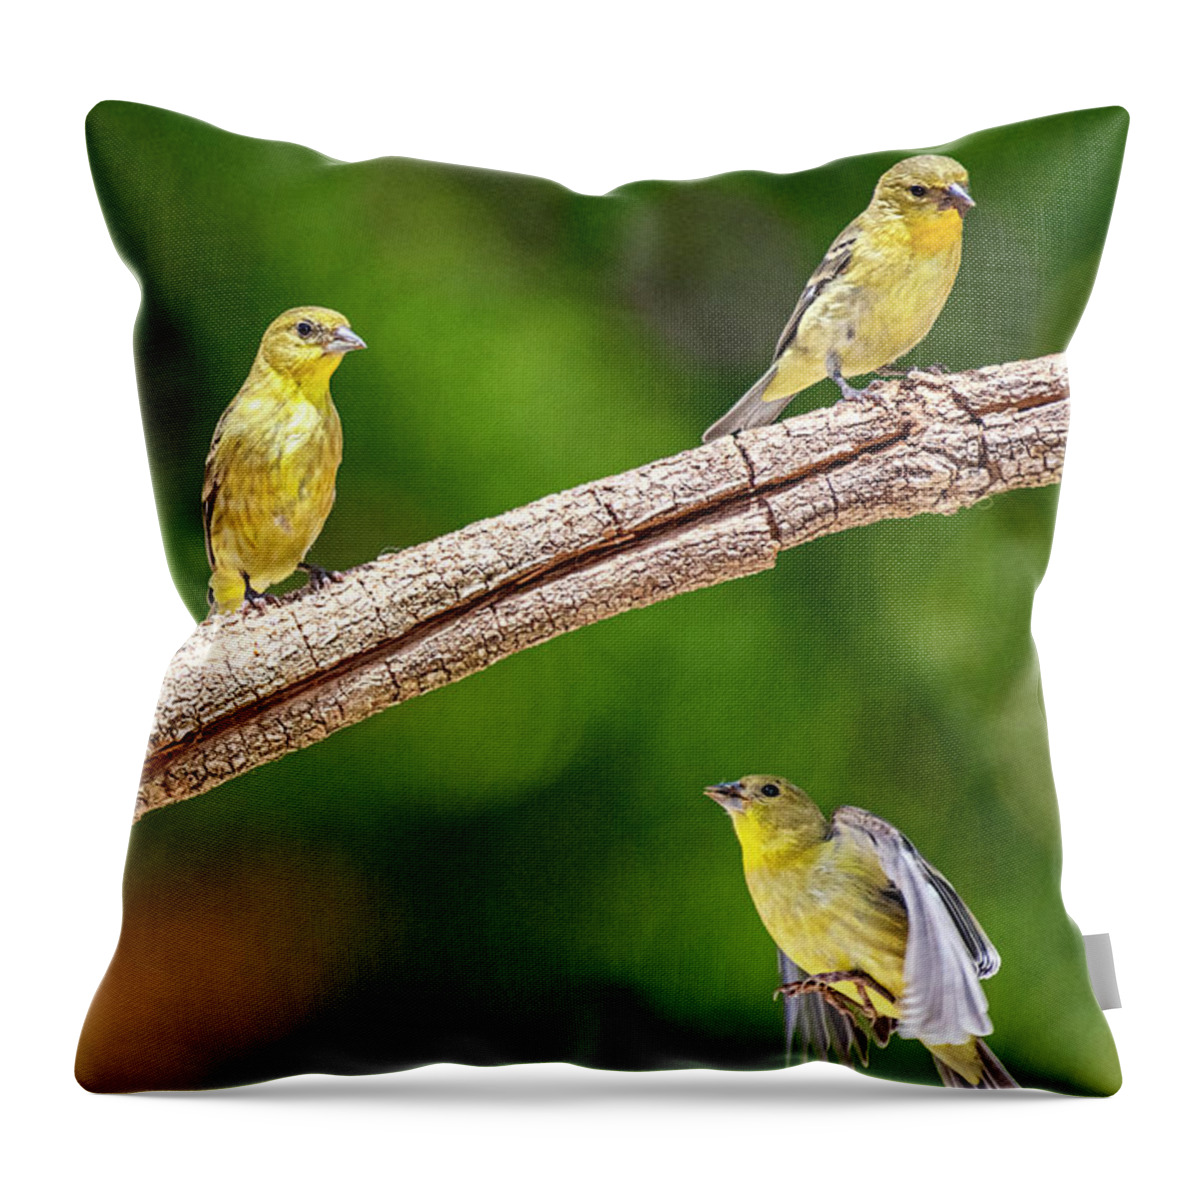 Finches Throw Pillow featuring the photograph Flying Finch by Dan McGeorge